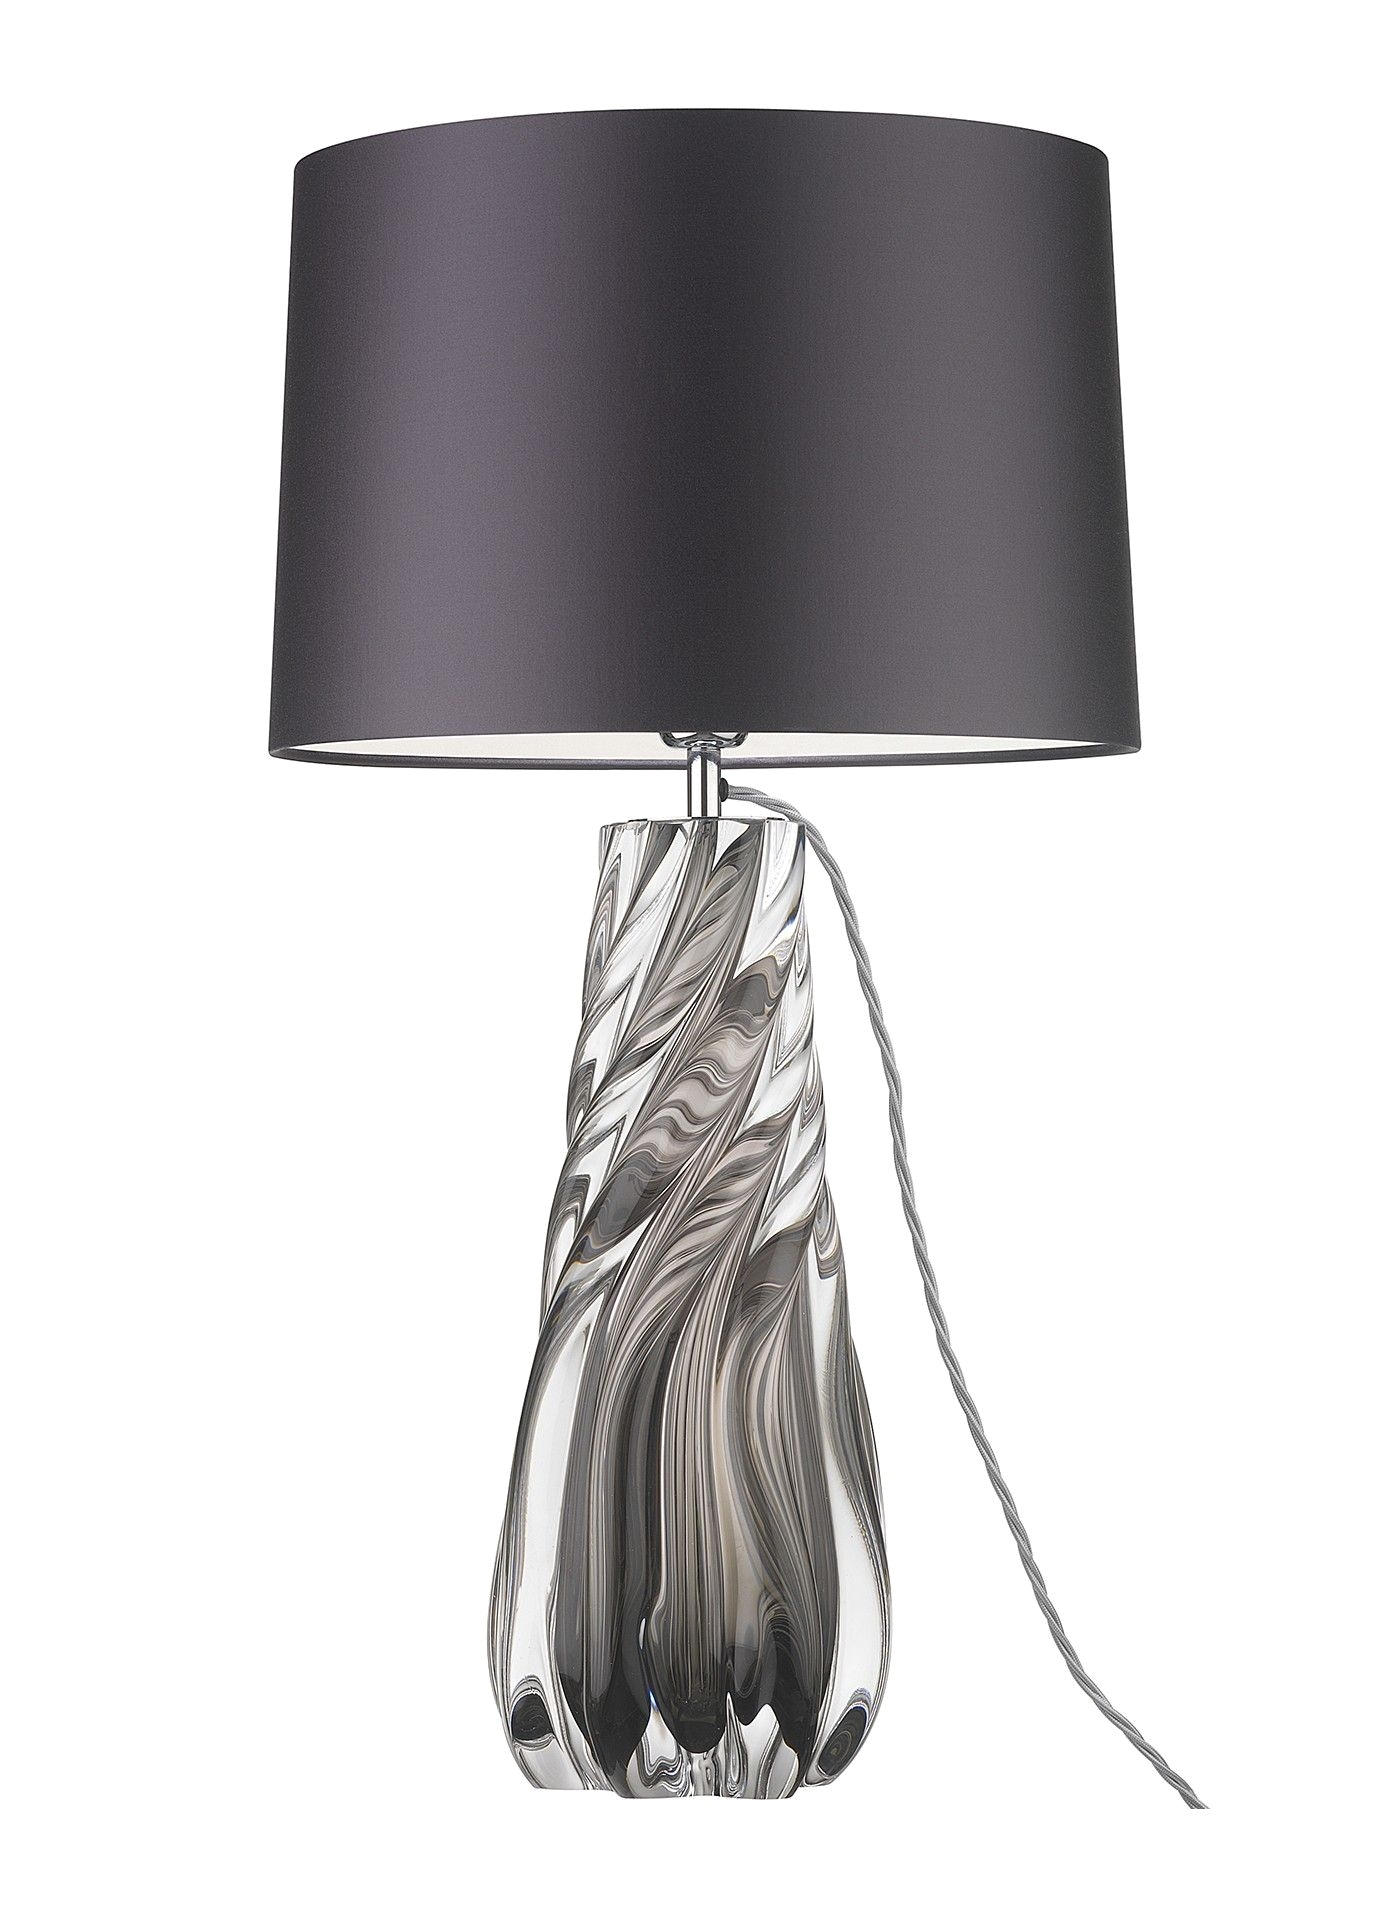 NAIAD SMOKE TABLE LAMP The Naiad lamp is a naturally formed hand blown piece in melted clear crisp glass and shown here in an elegant Smoke finish